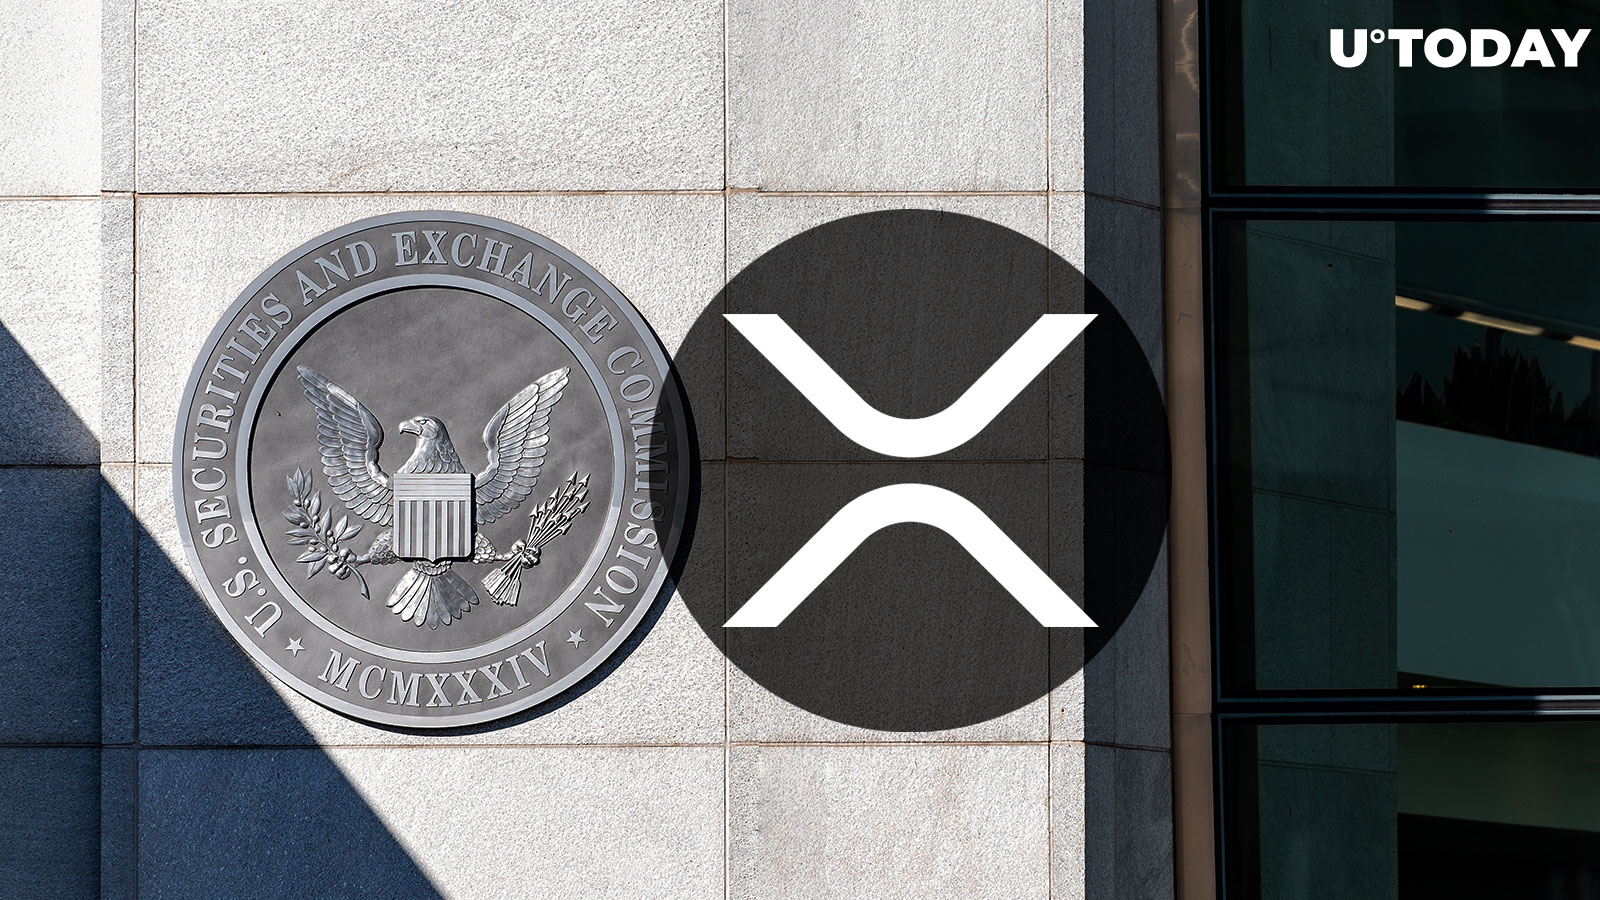 'Huge': SEC Emails Suggest XRP Is Not Security